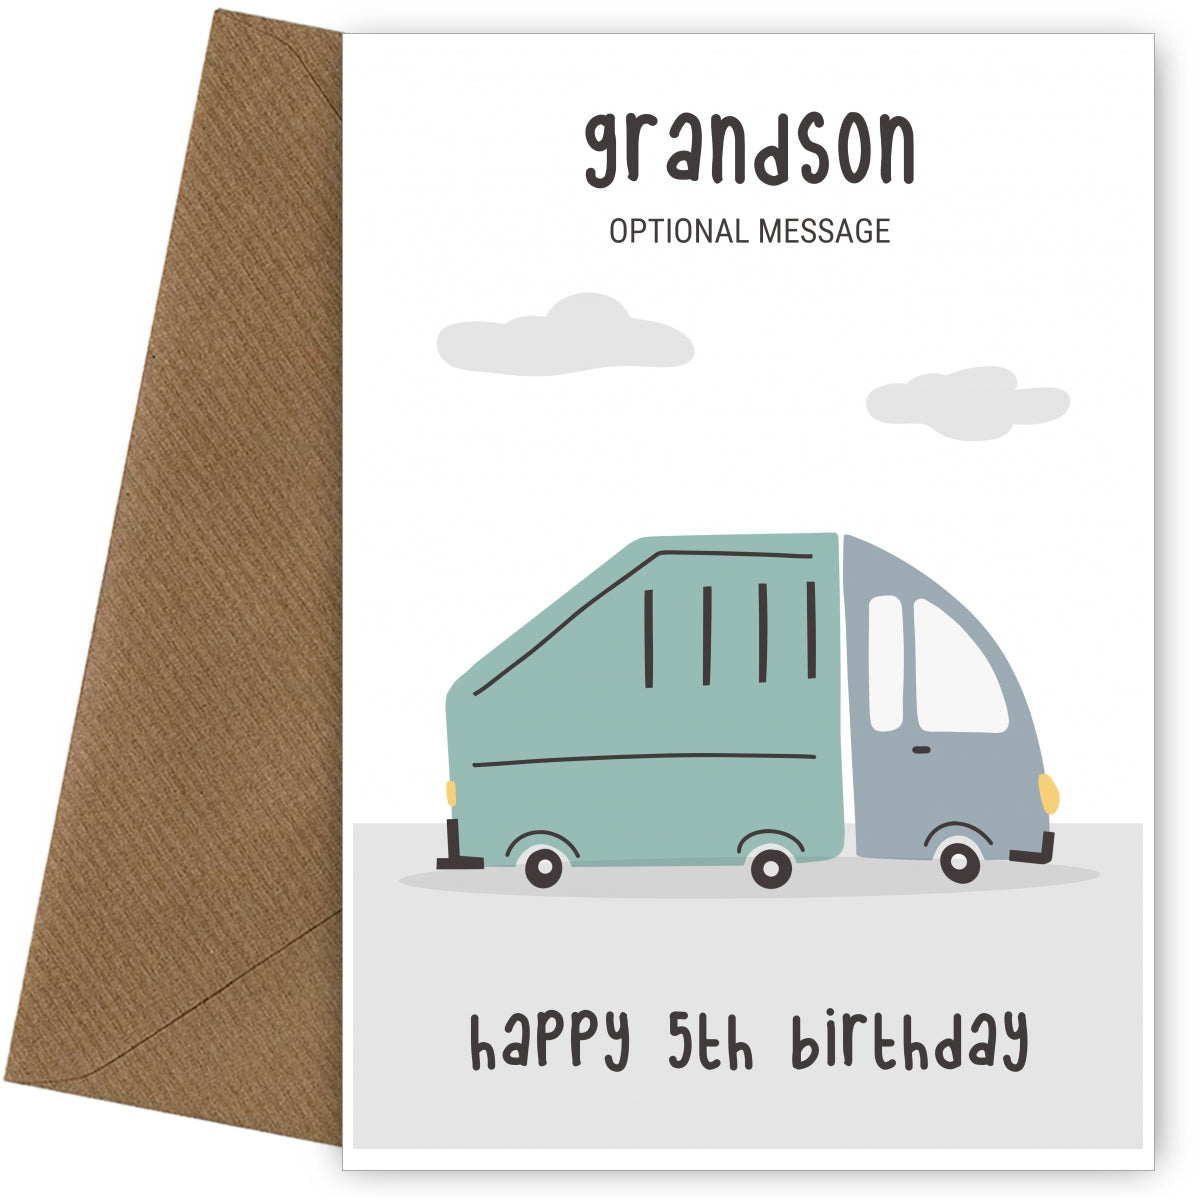 Fun Vehicles 5th Birthday Card for Grandson - Garbage Truck